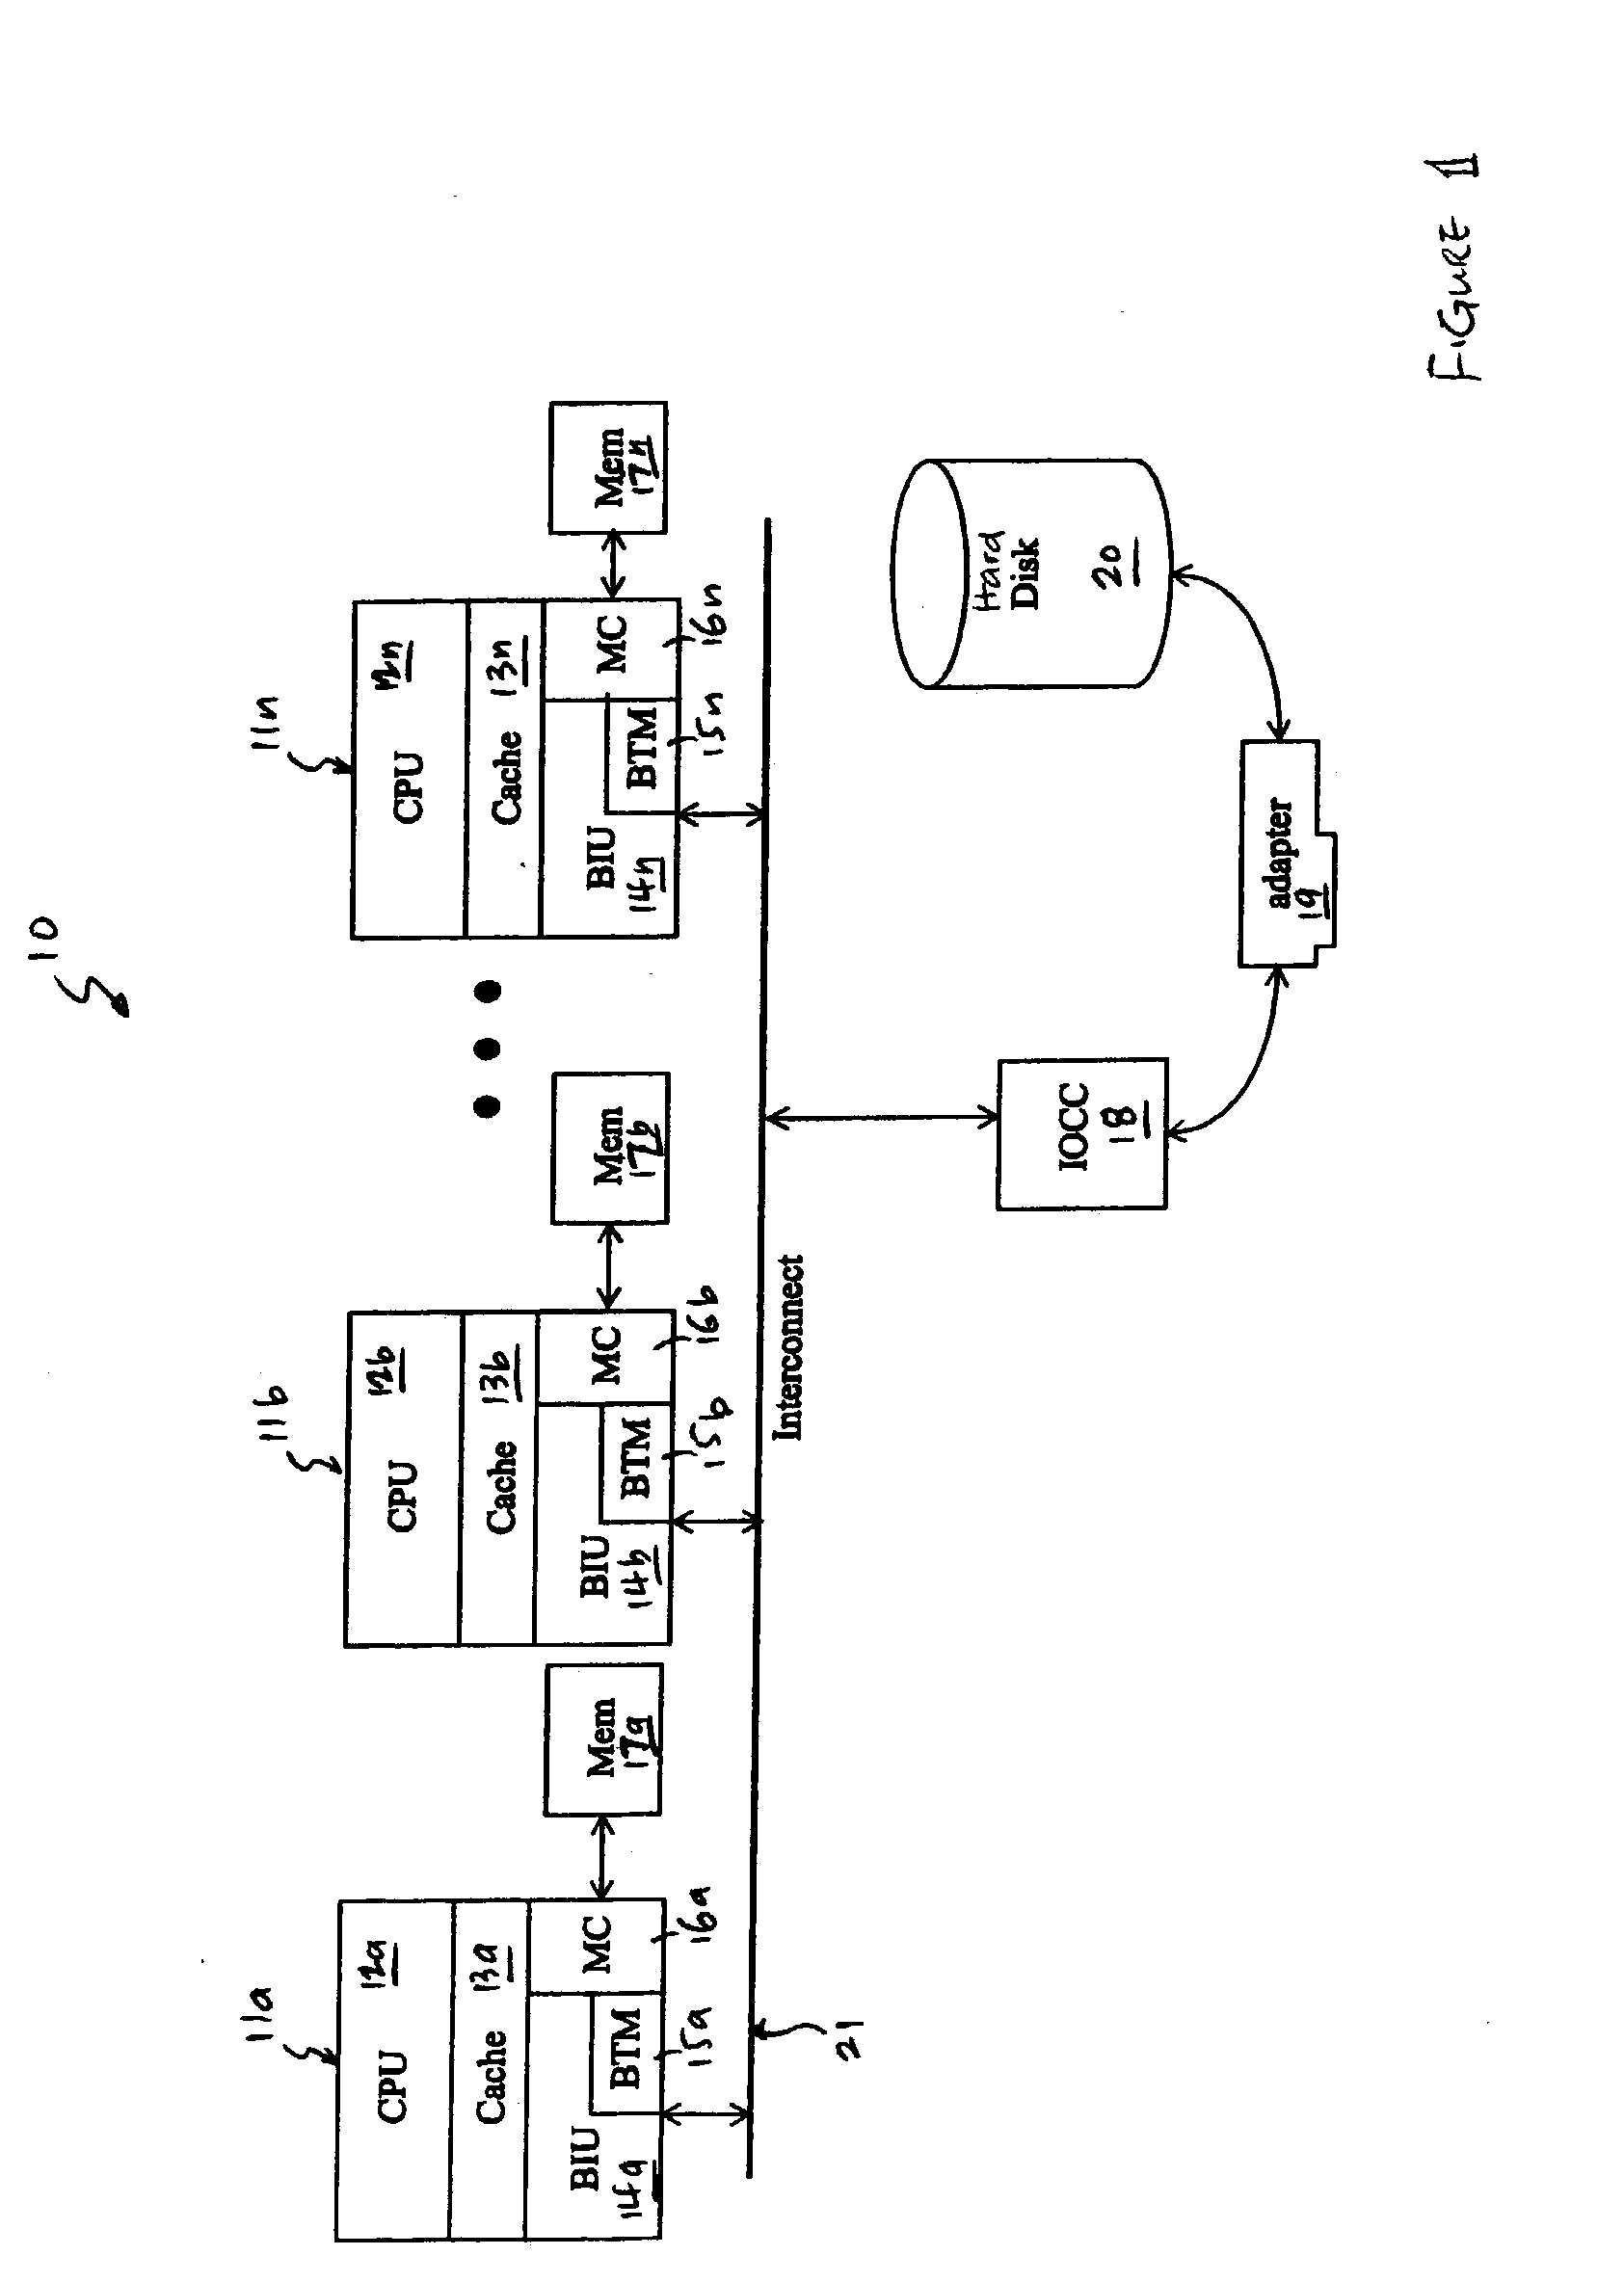 Method and apparatus for performing bus tracing in a data processing system having a distributed memory